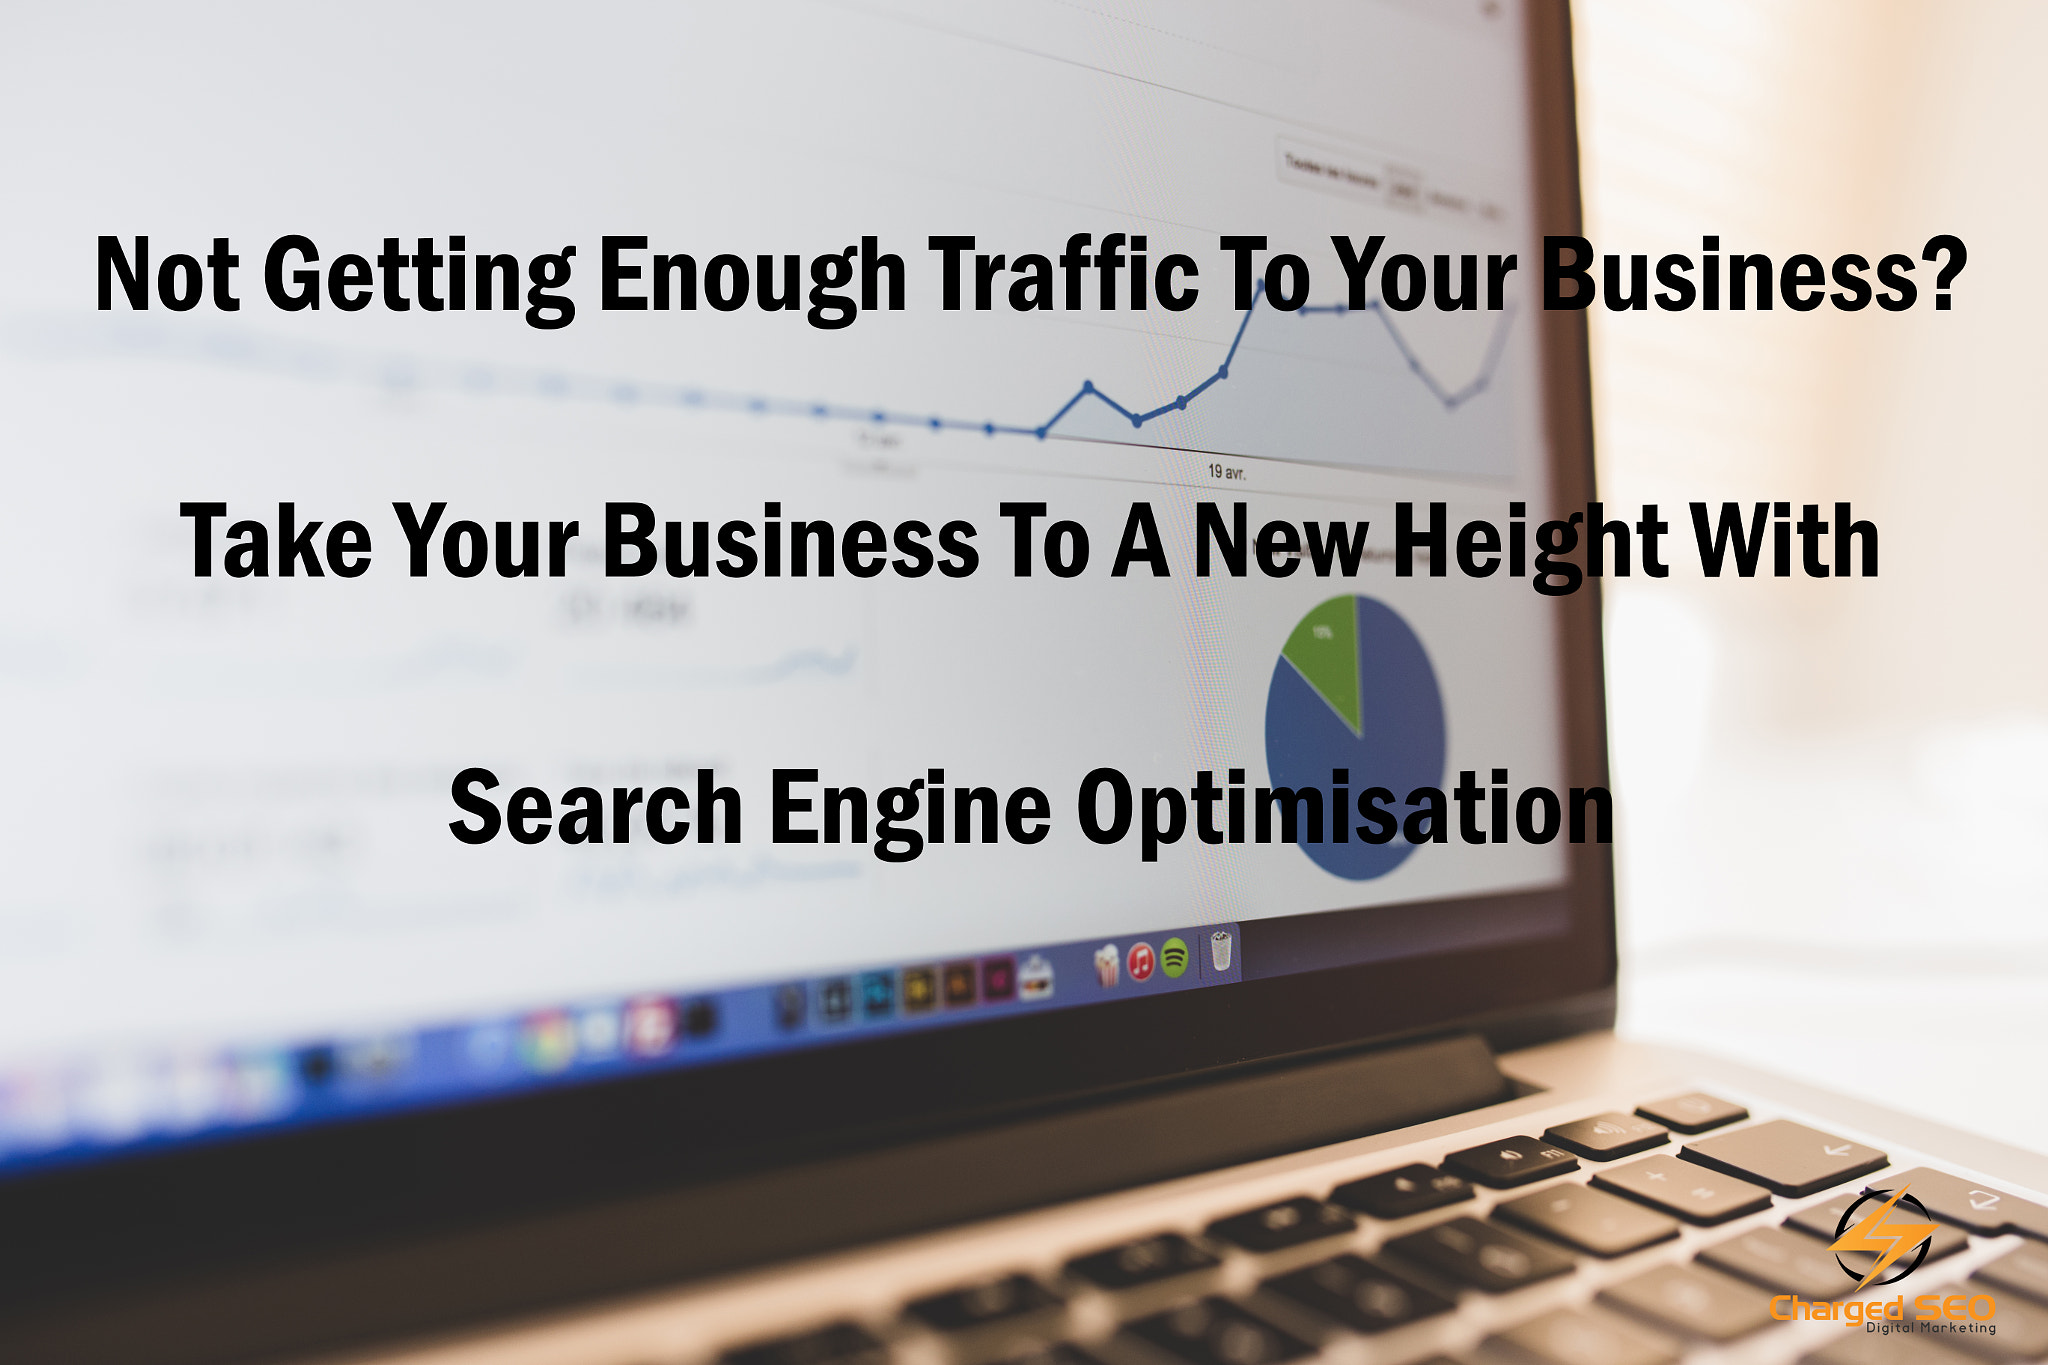 SEO Marketing for business growth